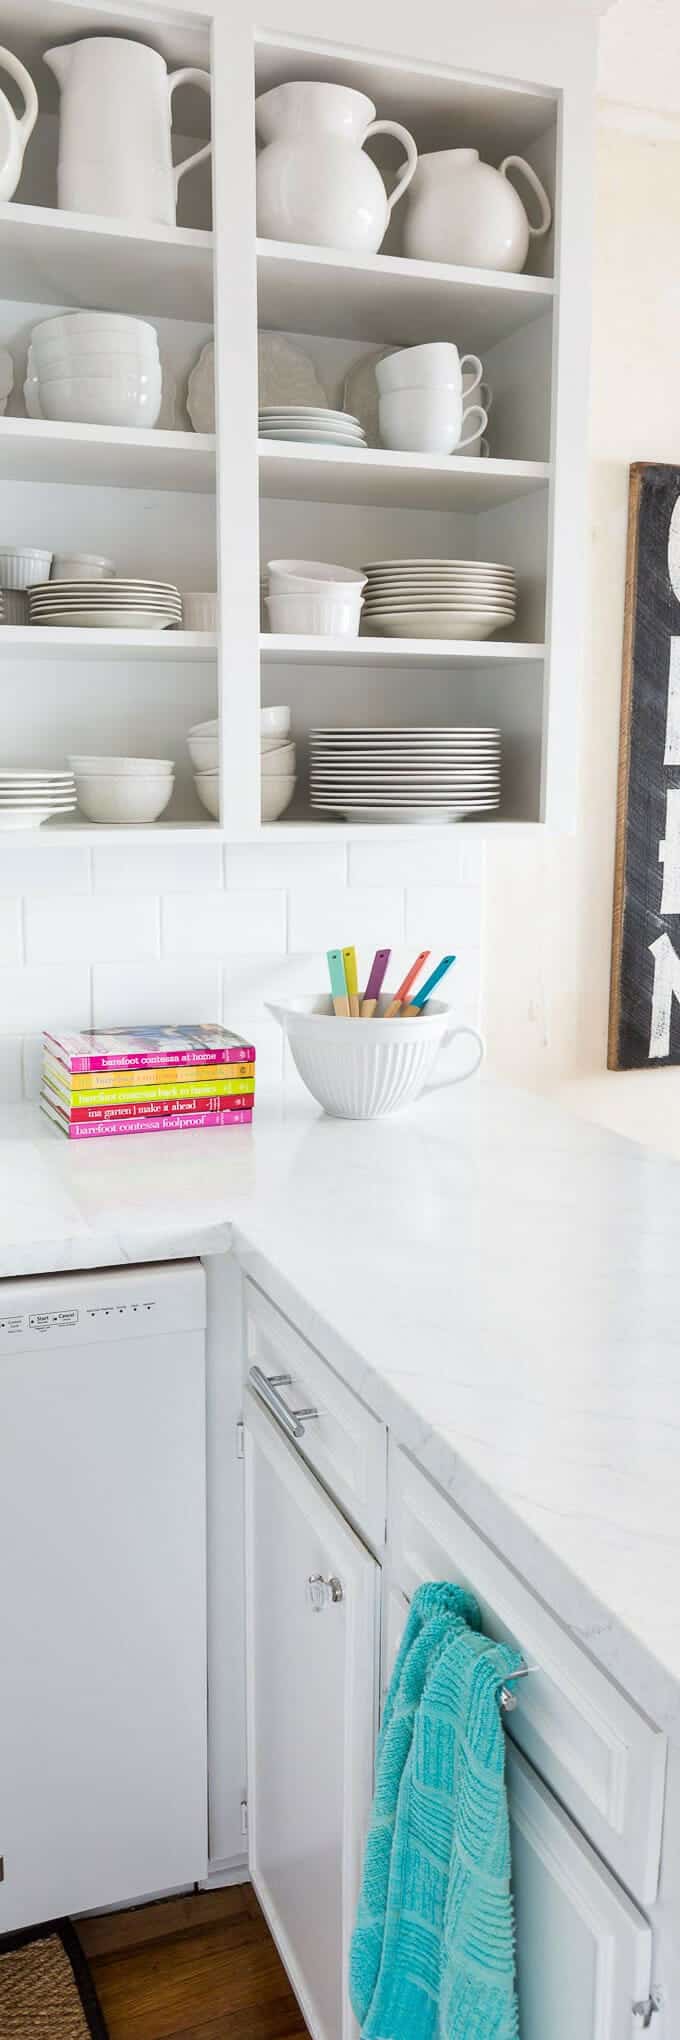 Easy Breezy Weekend Reads   Inspiring Ideas for Your Kitchen ...